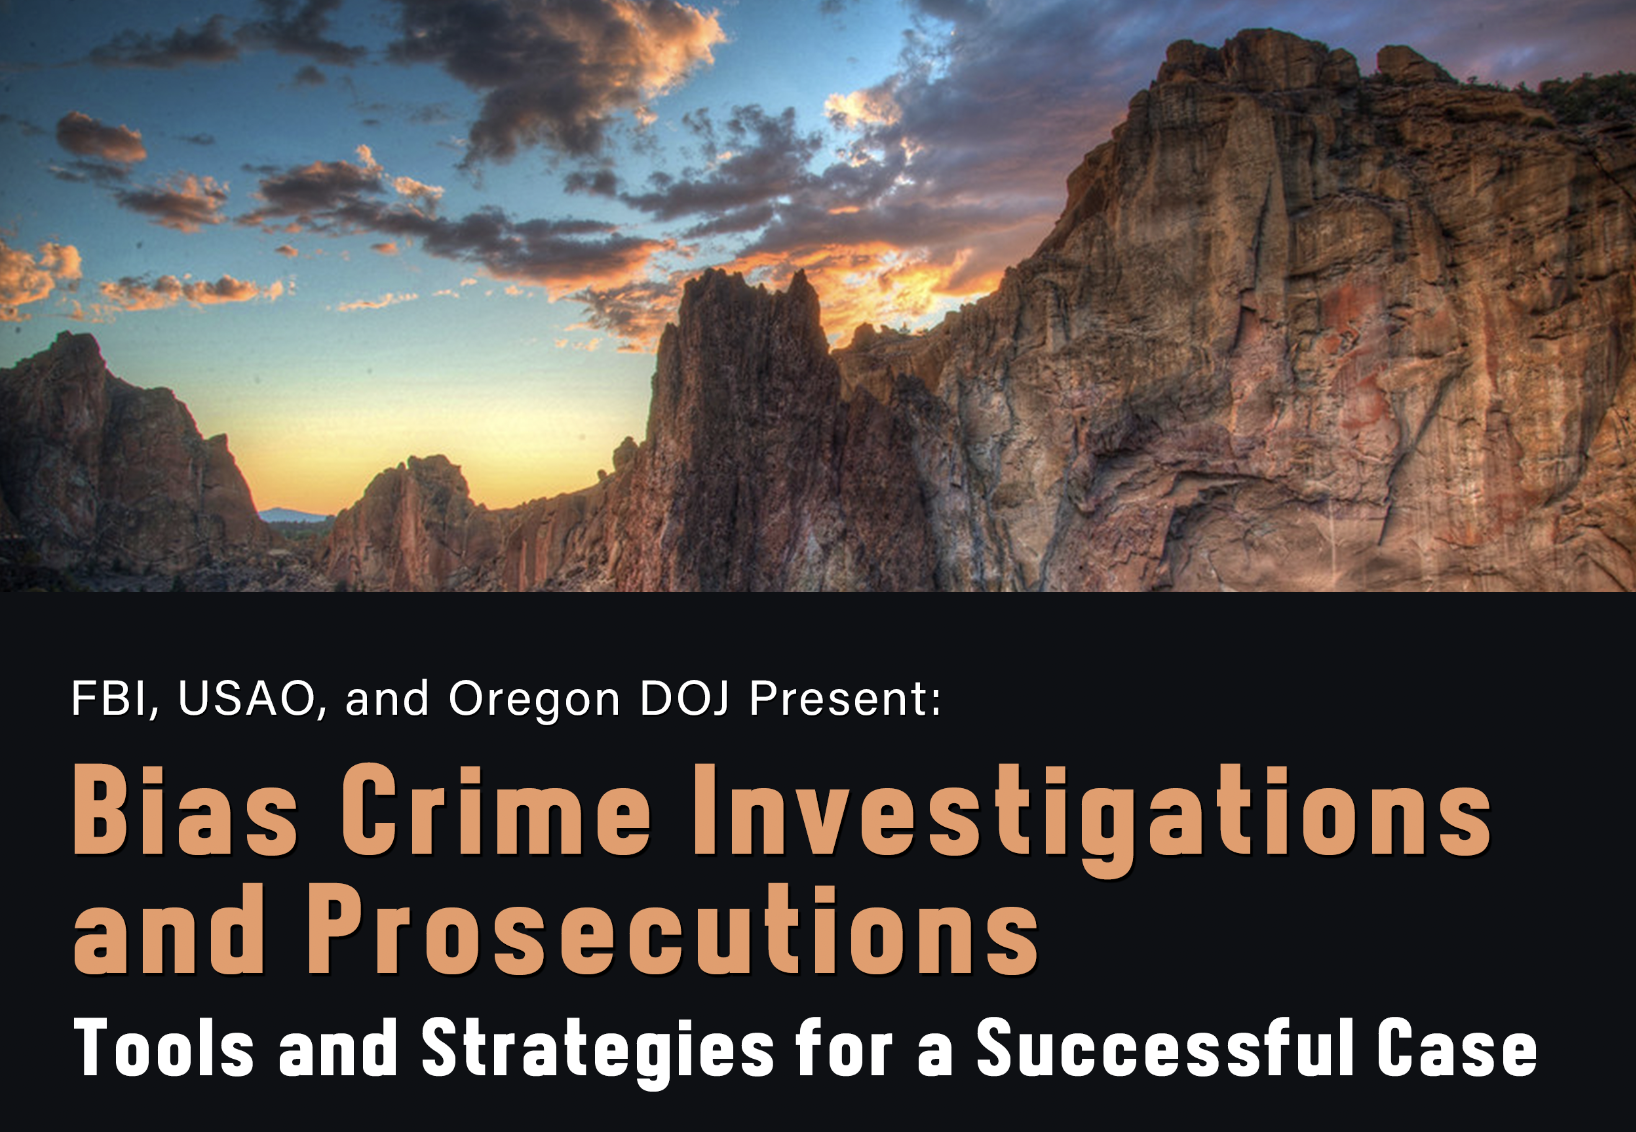 FBI, USAO, and Oregon DOJ Present: Bias Crime Investigations and Prosecutions, Tools and Strategies for a Successful Case